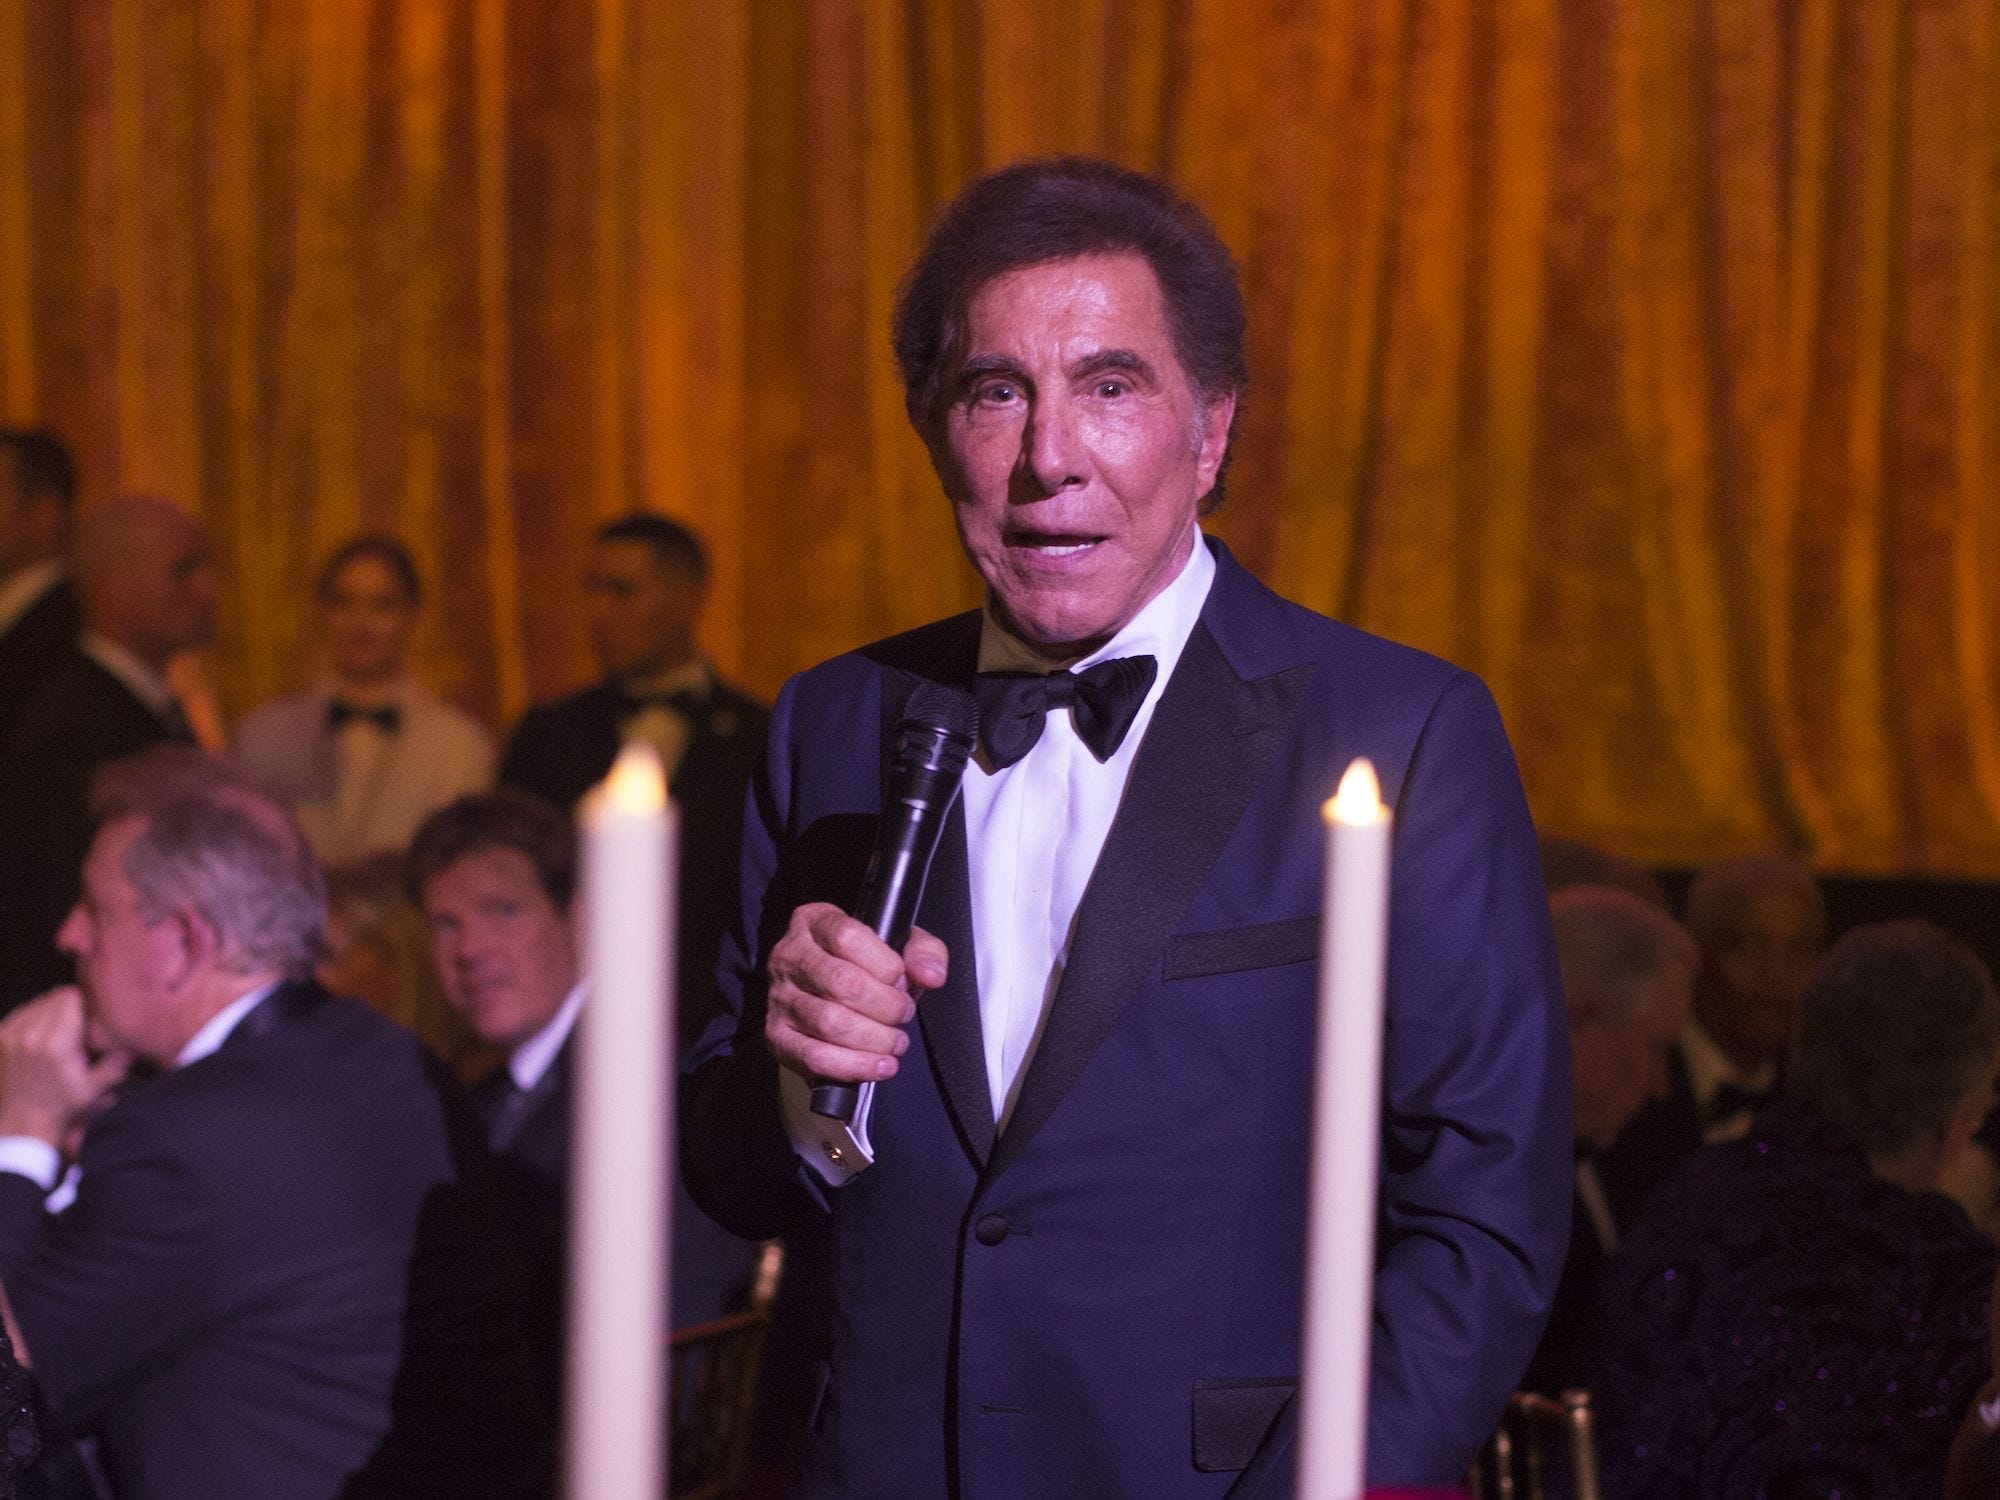 <p>Casino mogul and real estate developer Steve Wynn has given $806,300 to the Trump 47 Committee this year.</p><p>Wynn, a longtime GOP megadonor, served as the vice-chairman of Trump's inaugural committee in 2017.</p><p>He has been accused of both <a href="https://www.businessinsider.com/rnc-accepted-1-4-million-from-steve-wynn-recent-years-2023-12">sexual misconduct</a> and of <a href="https://www.businessinsider.com/judge-dismiss-foreign-agent-lawsuit-trump-donor-casino-steve-wynn-2022-10">acting as a foreign agent</a> on behalf of China, though a judge tossed out the latter charge.</p>